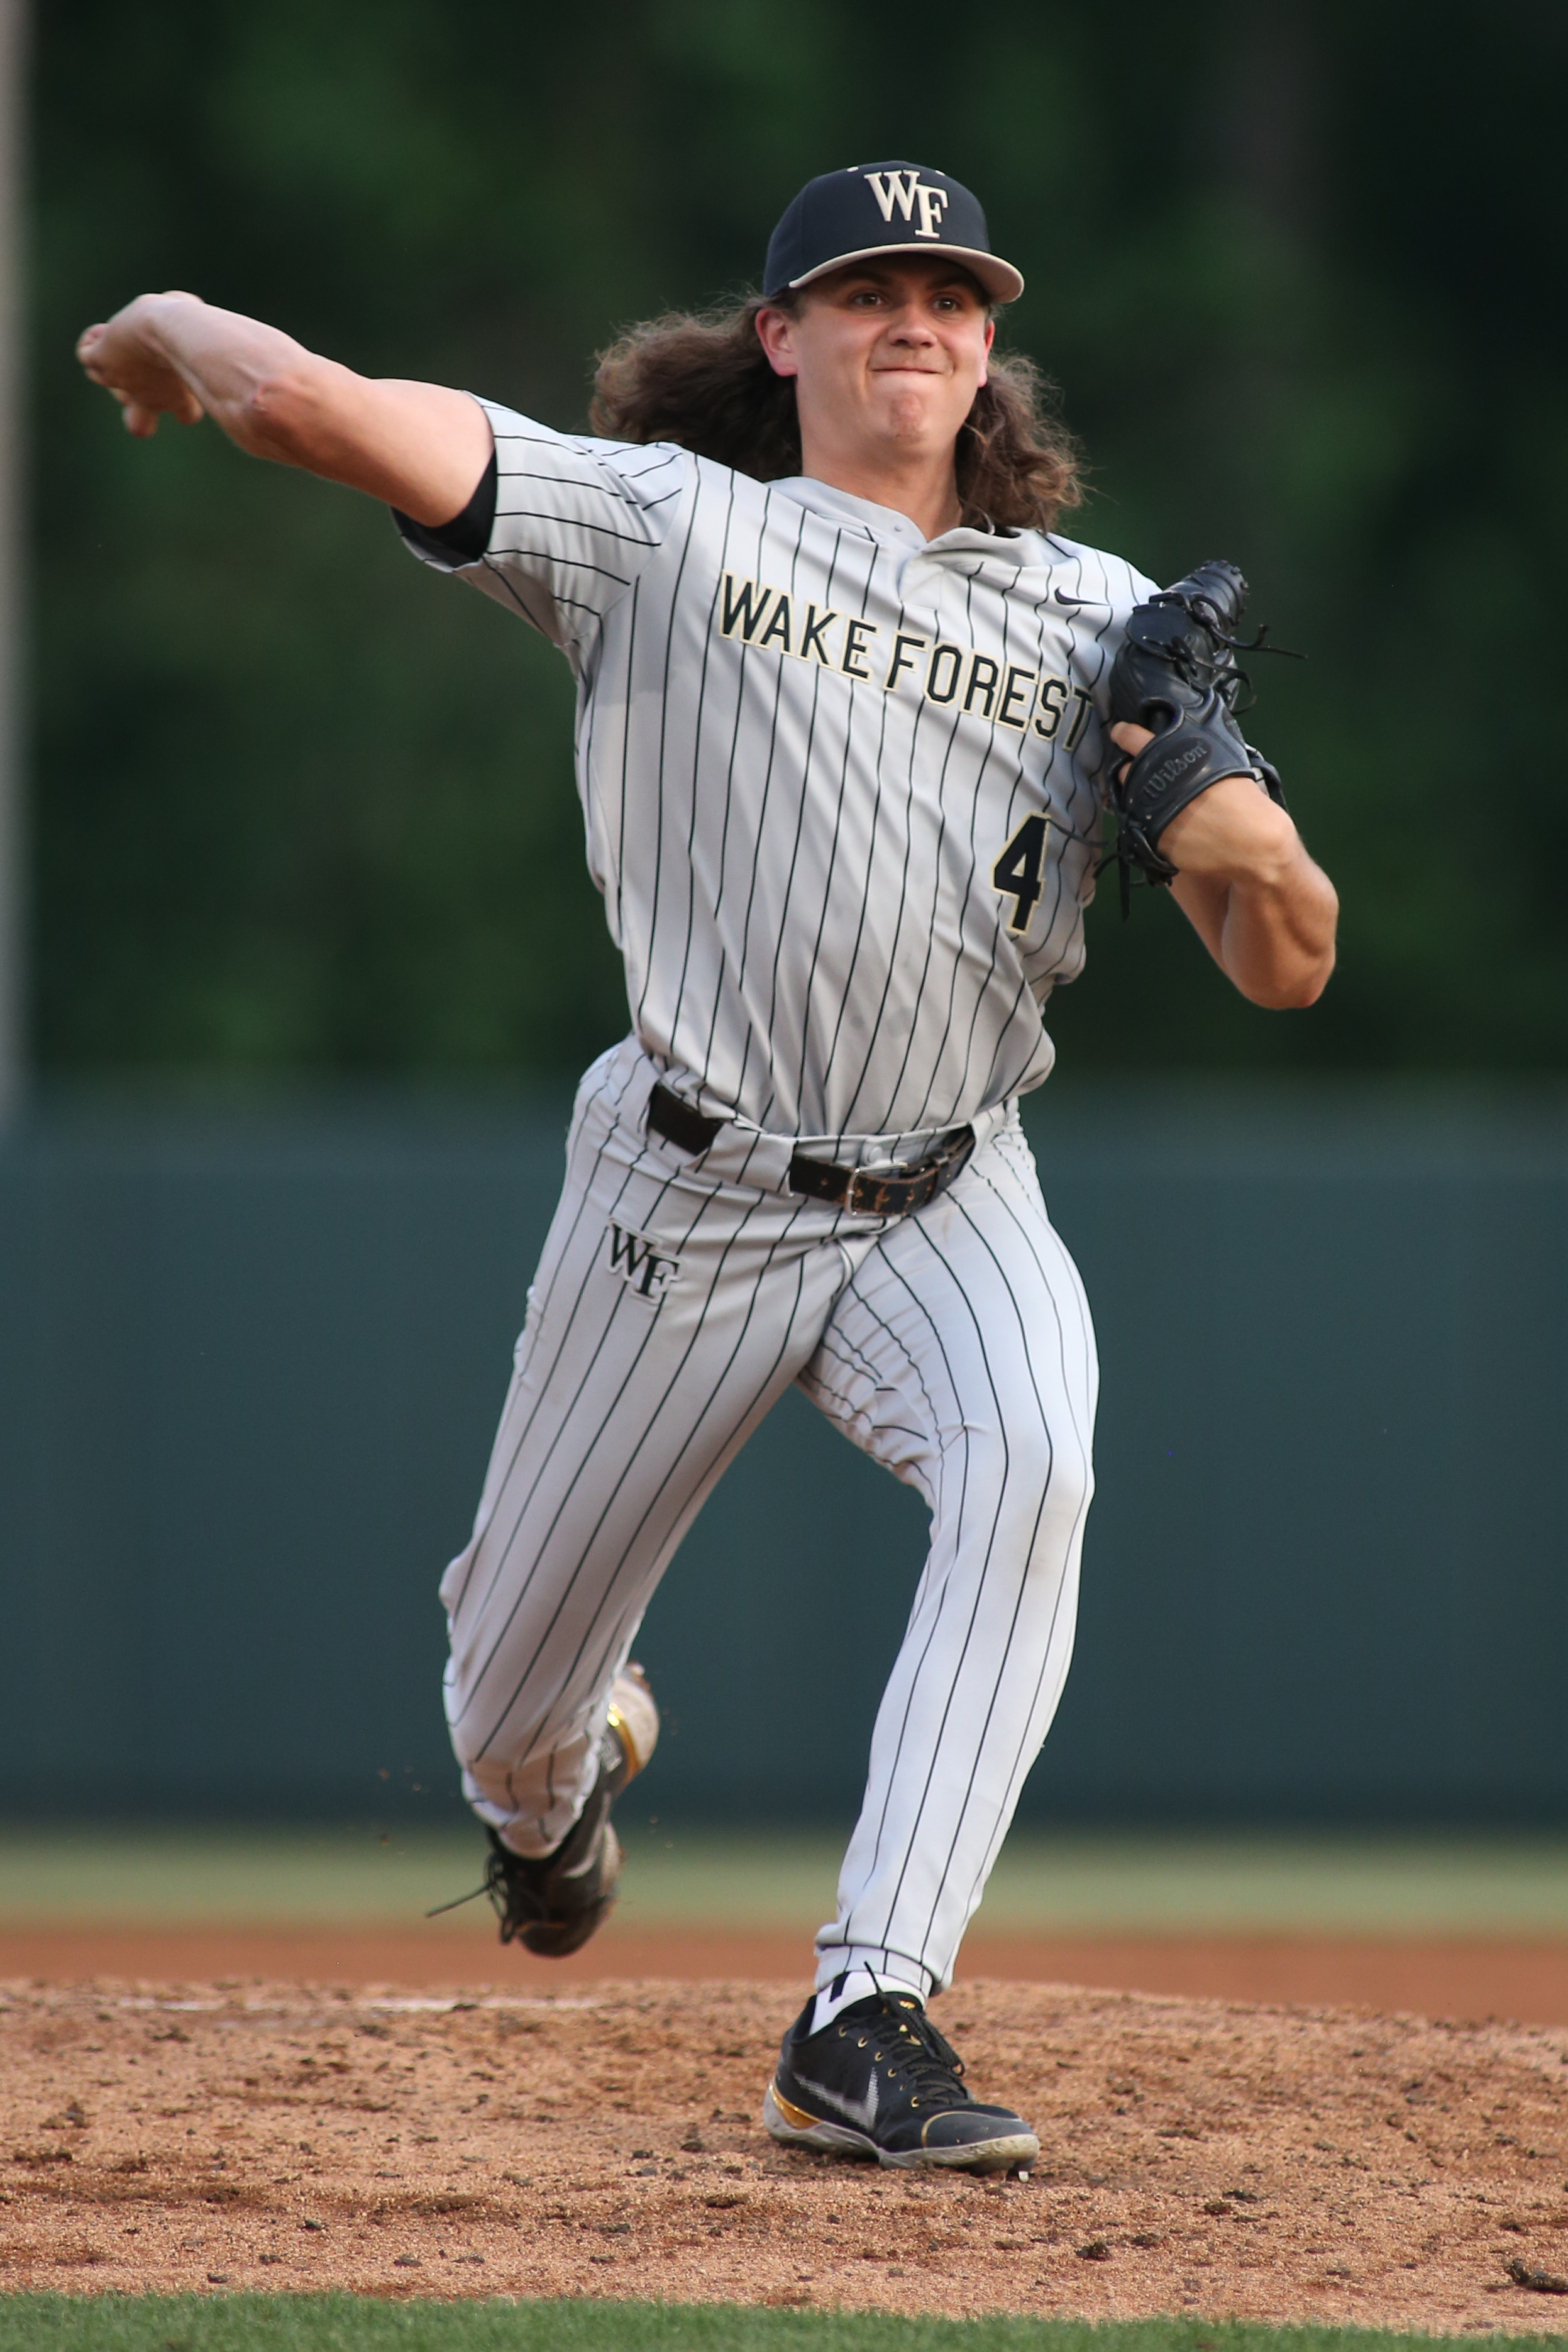 COLLEGE BASEBALL: MAY 19 Wake Forest at N.C. State